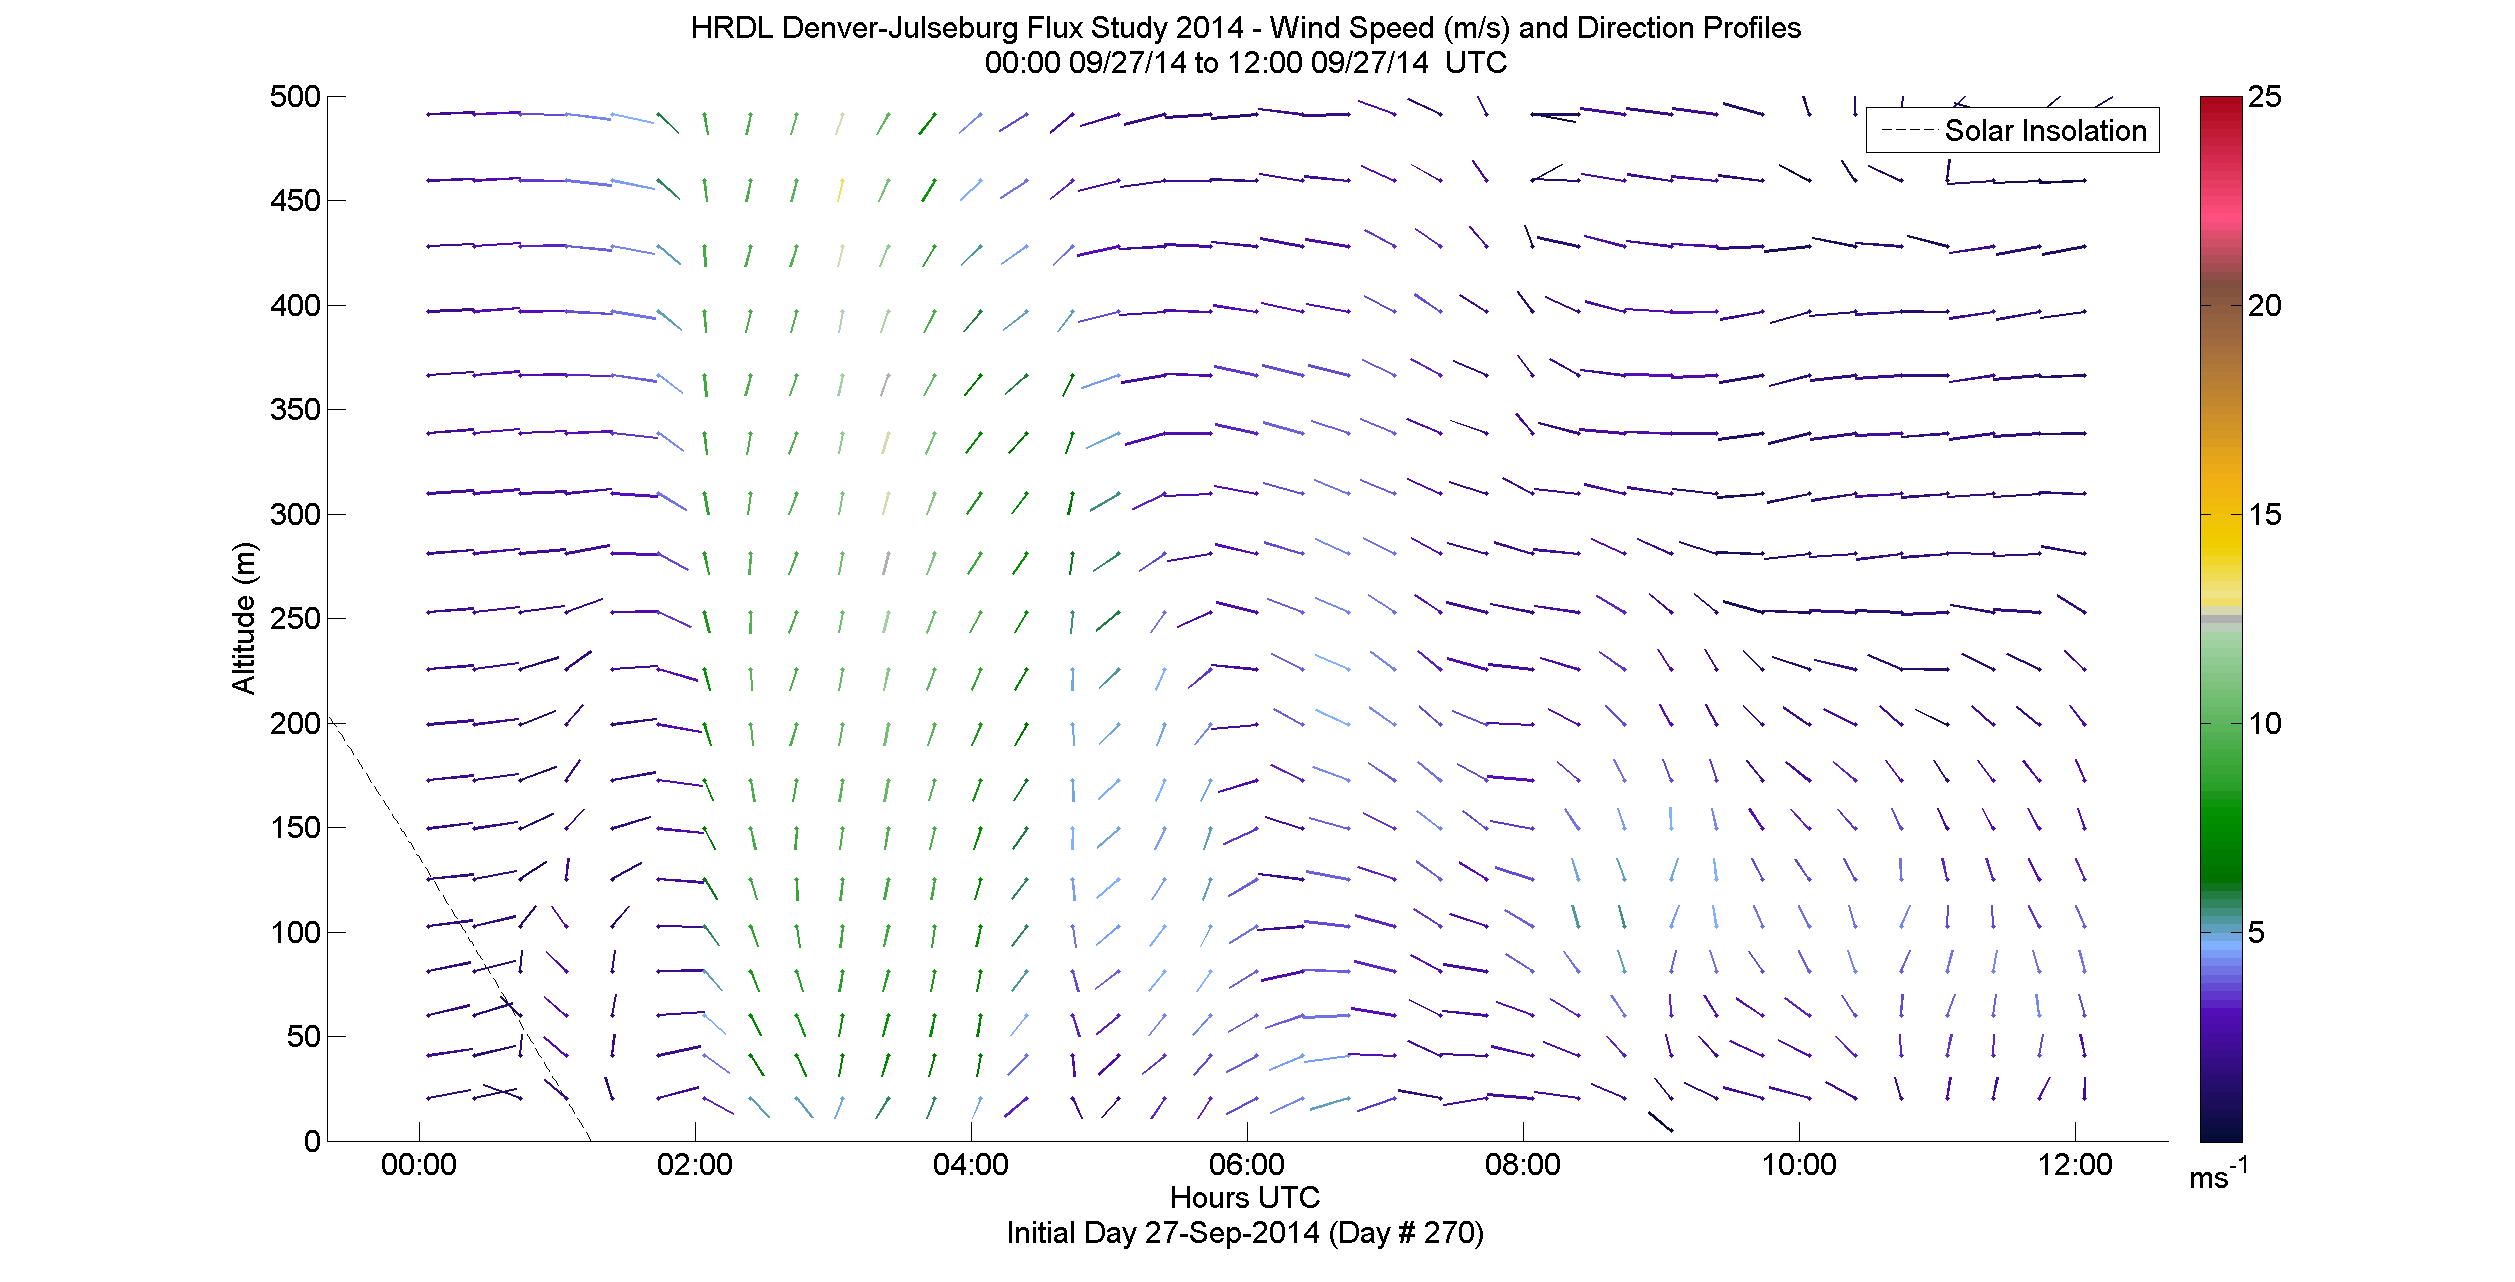 HRDL speed and direction profile - September 27 am